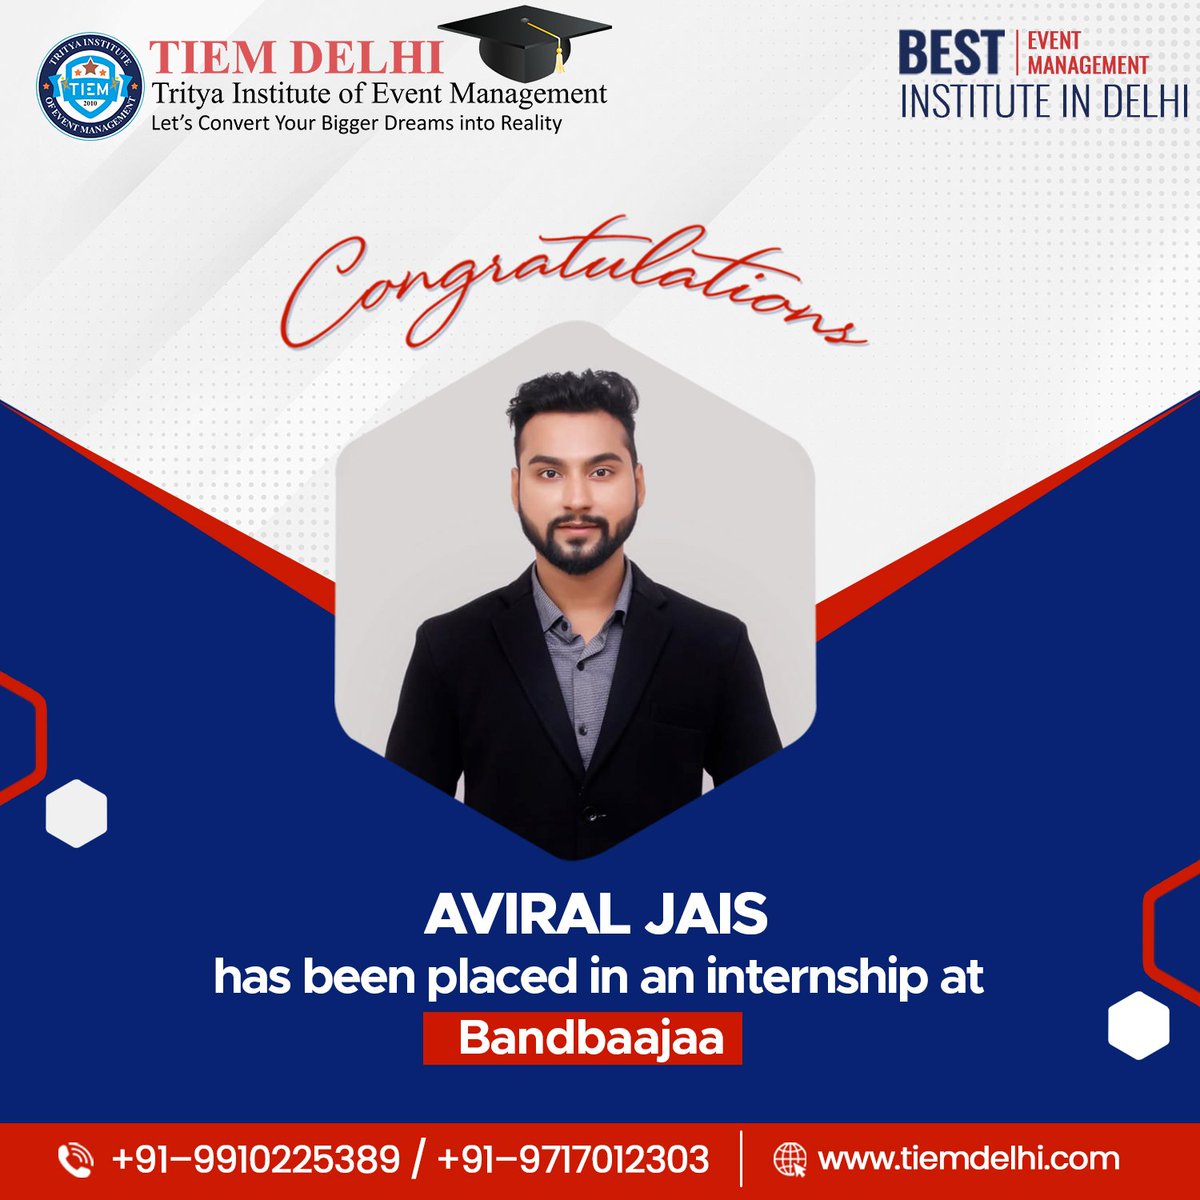 🎉 Exciting News Alert! 🎉 Aviral Jais has secured an internship at Bandbaajaa! 🌟 Here's to new beginnings and endless opportunities! 🚀
.
.
.
.
.
.
#CareerJourney #SuccessStory #Bandbaajaa #InternLife #CareerGoals #OpportunityKnocks #DreamJob #AchievementUnlocked #Education